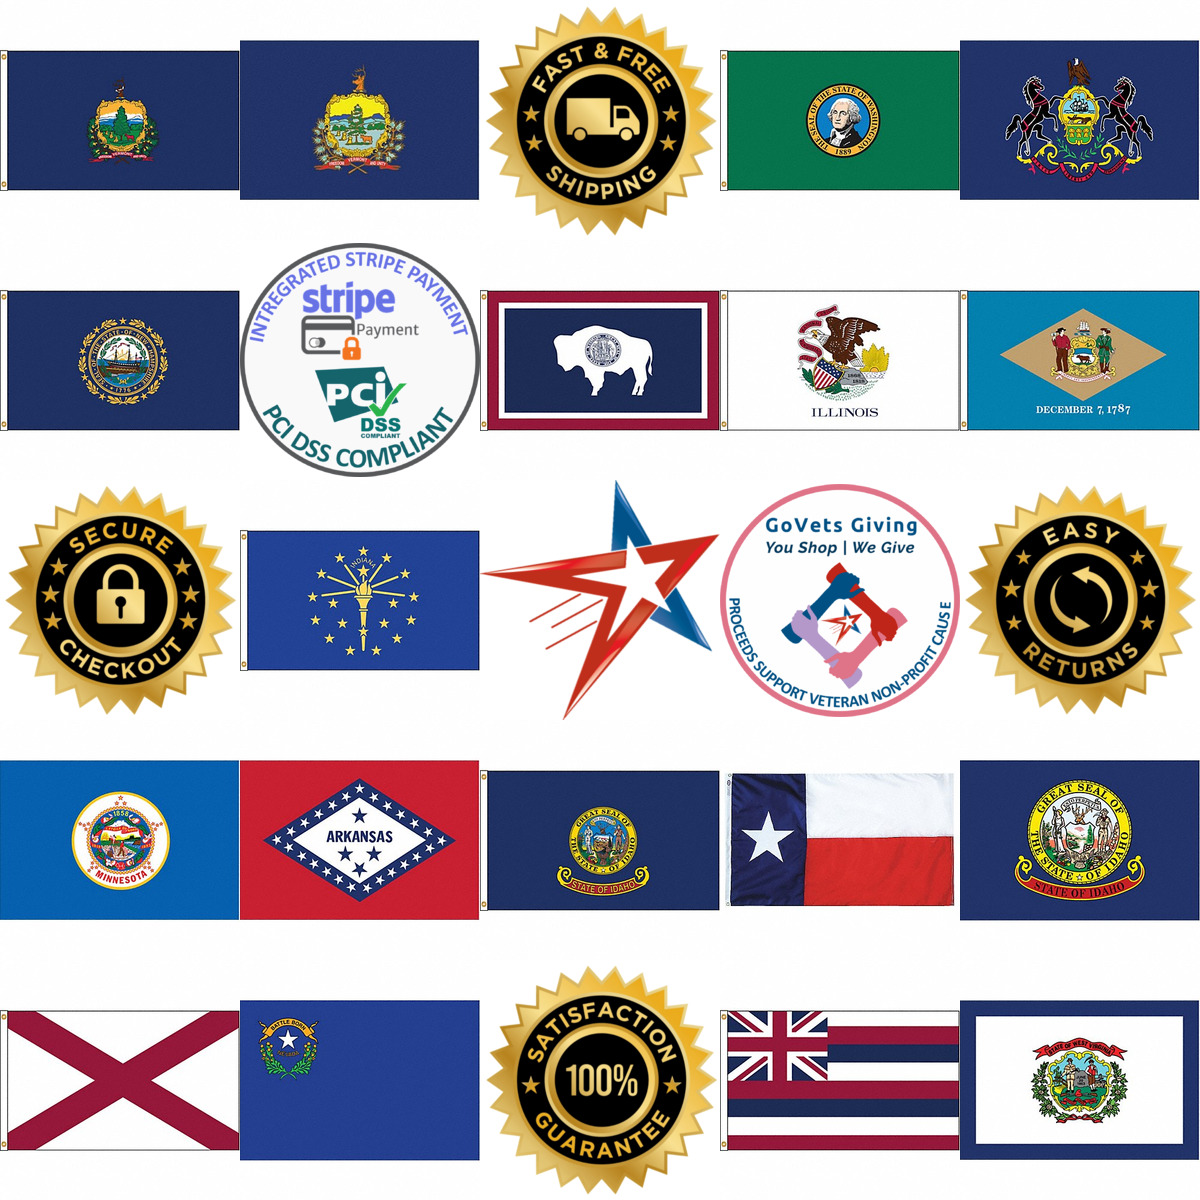 A selection of State Flags products on GoVets